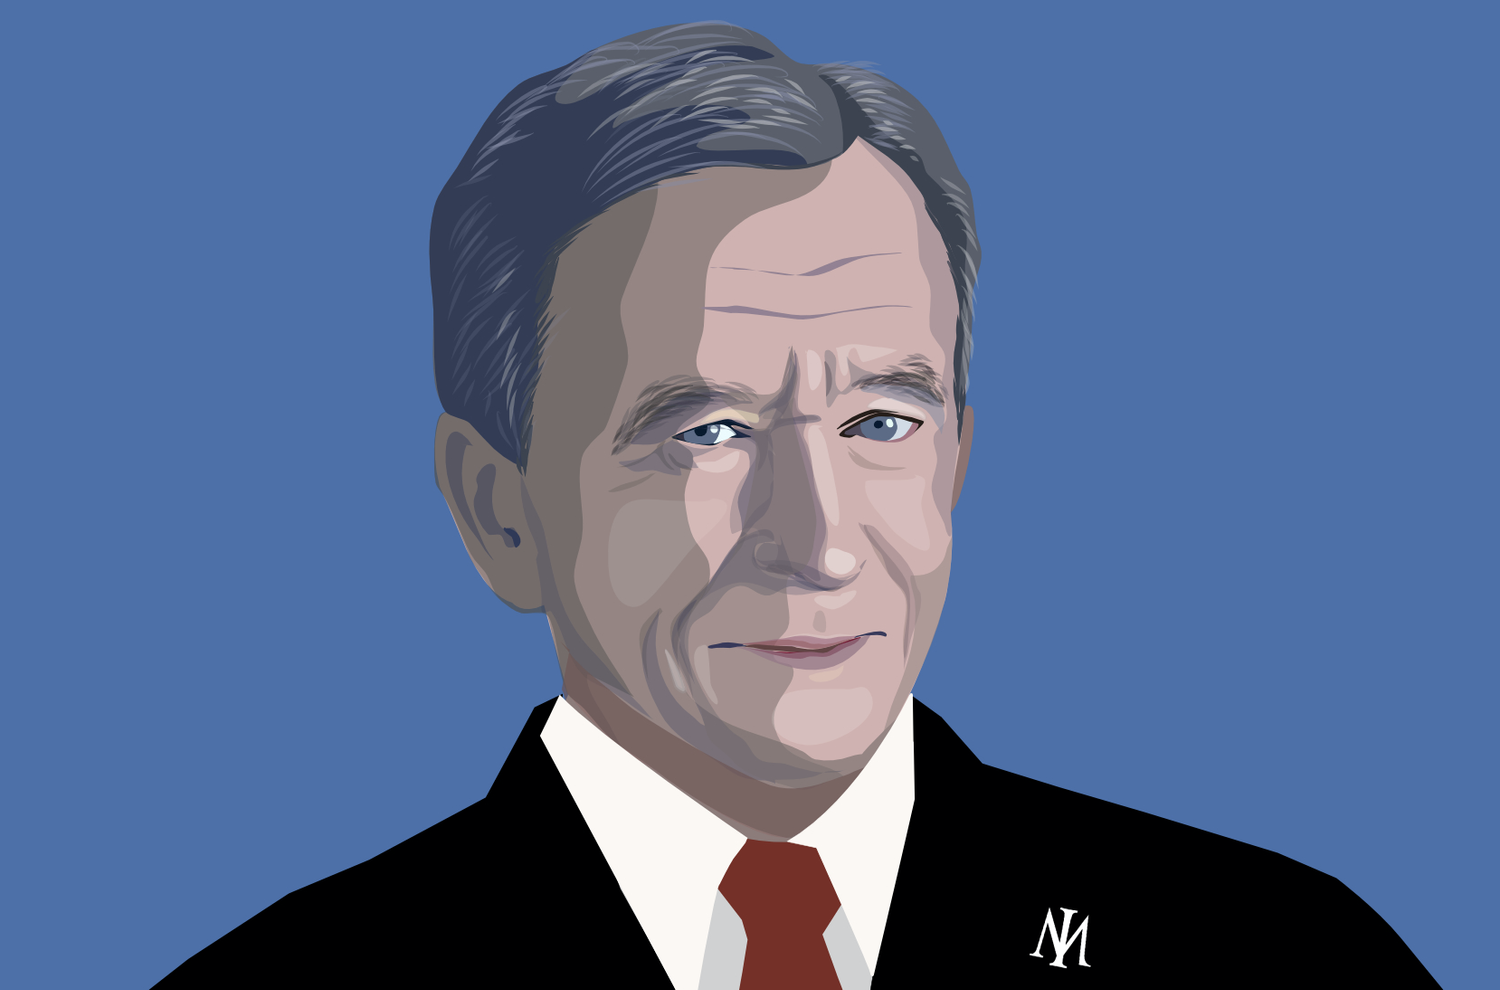 Luxury goods chief Bernard Arnault has eye on extended stay at